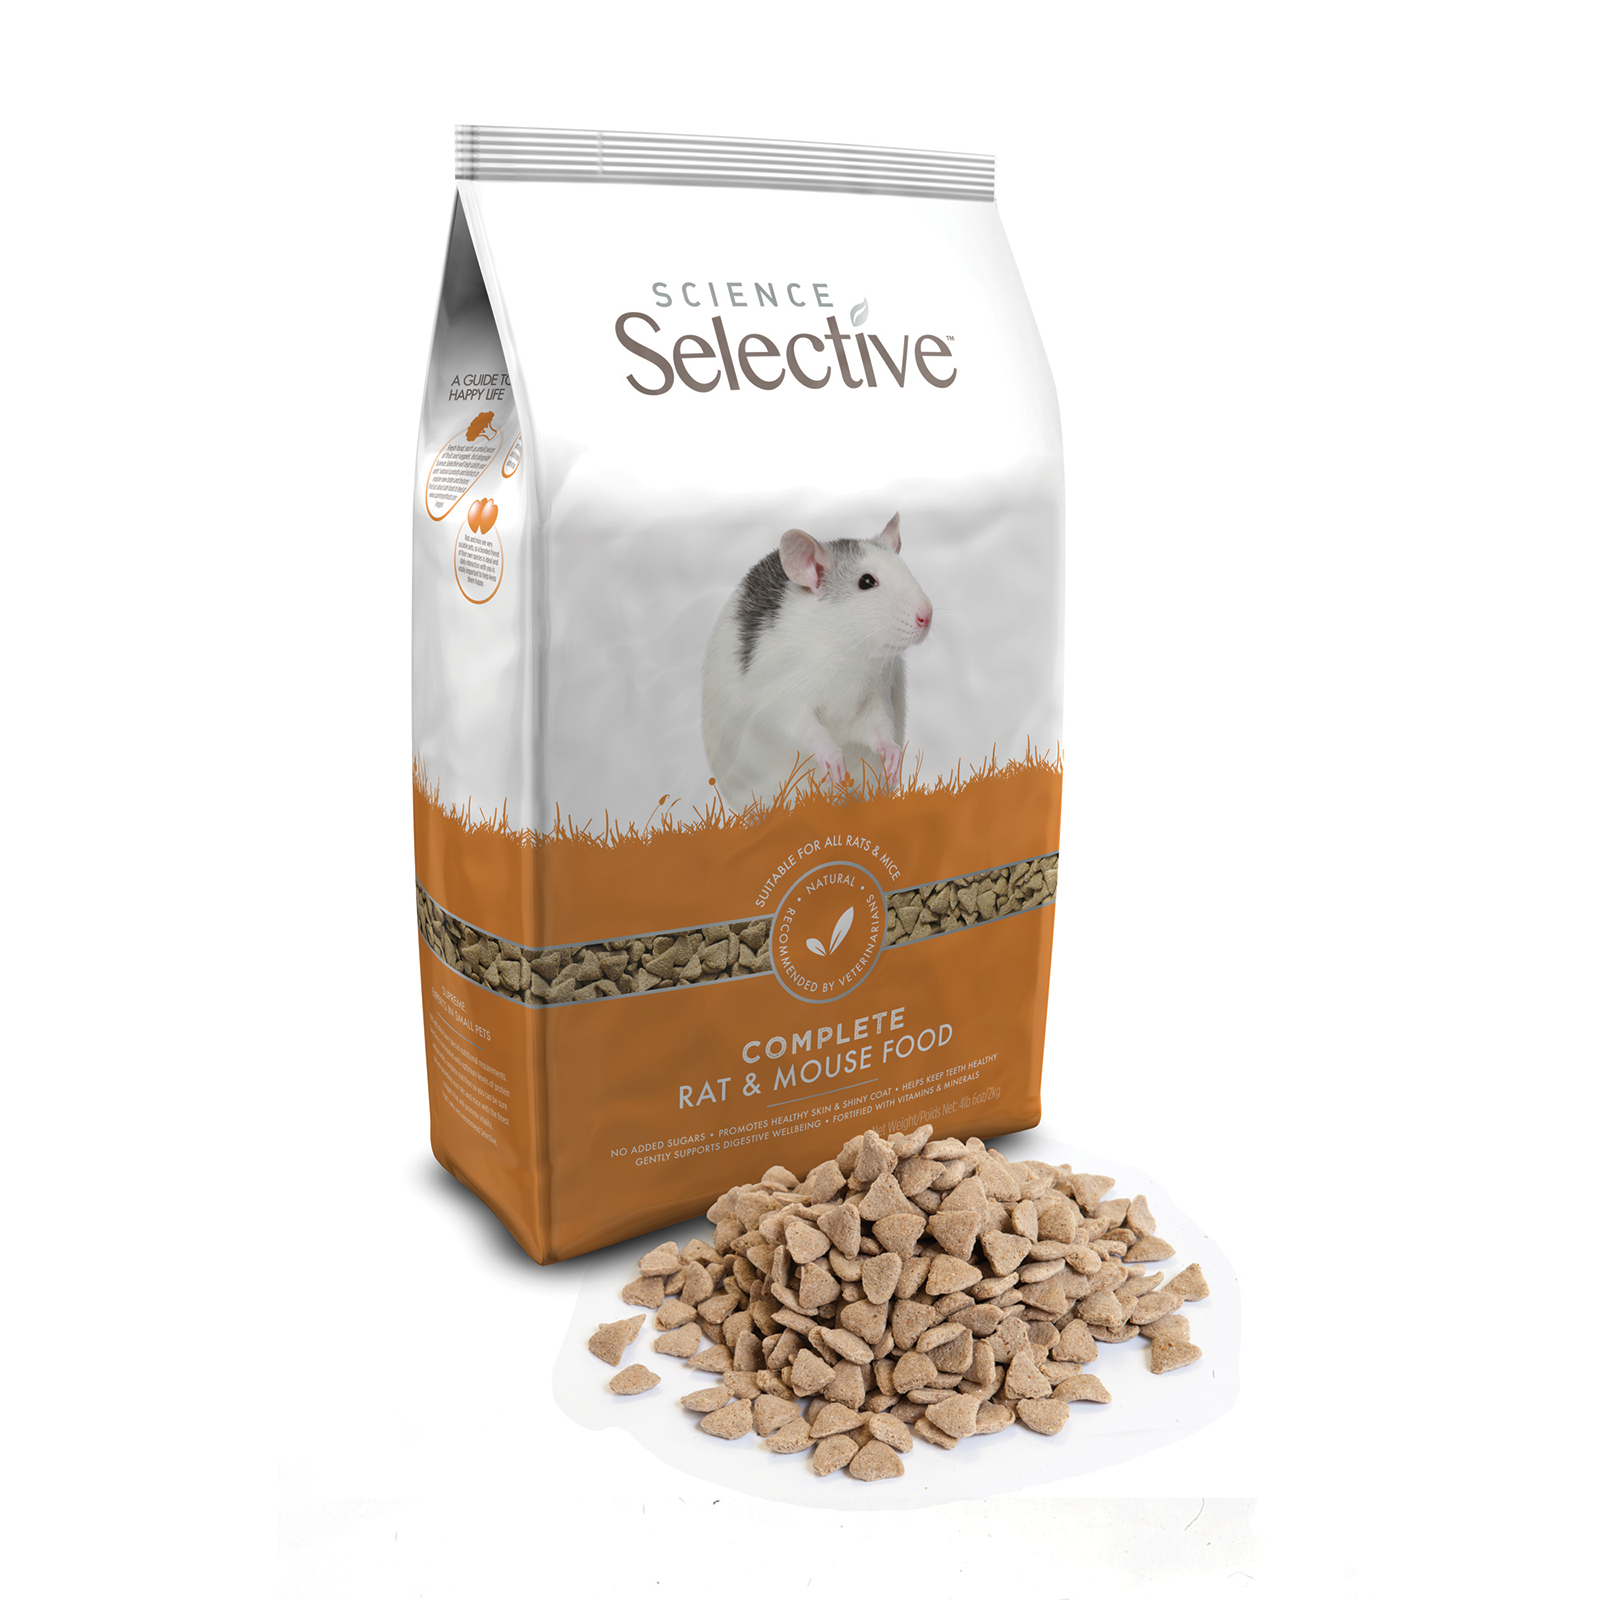 Science Selective Rat & Mouse Food